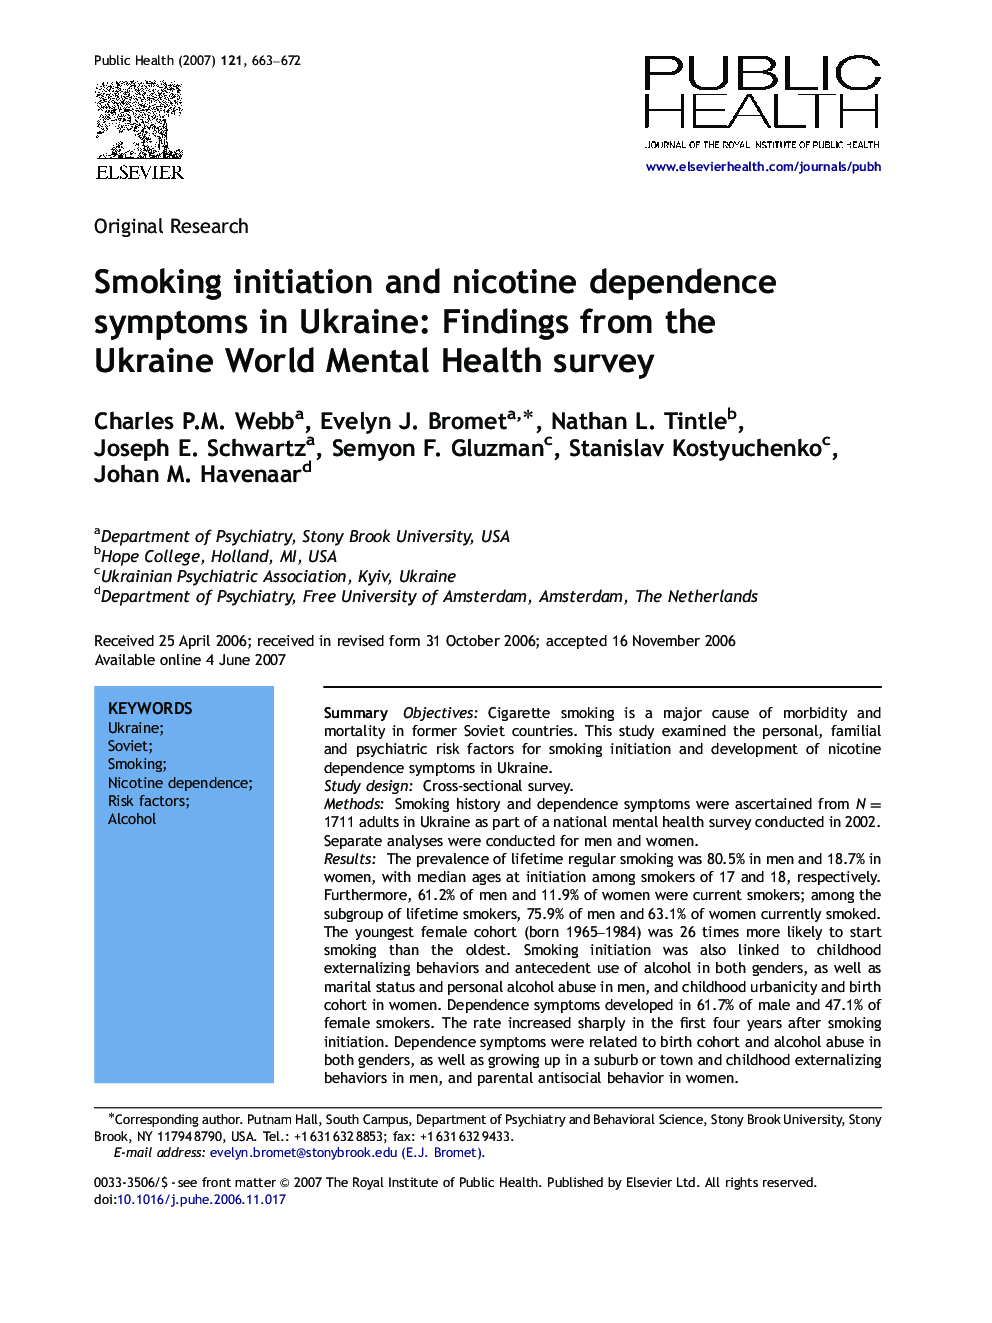 Smoking initiation and nicotine dependence symptoms in Ukraine: Findings from the Ukraine World Mental Health survey